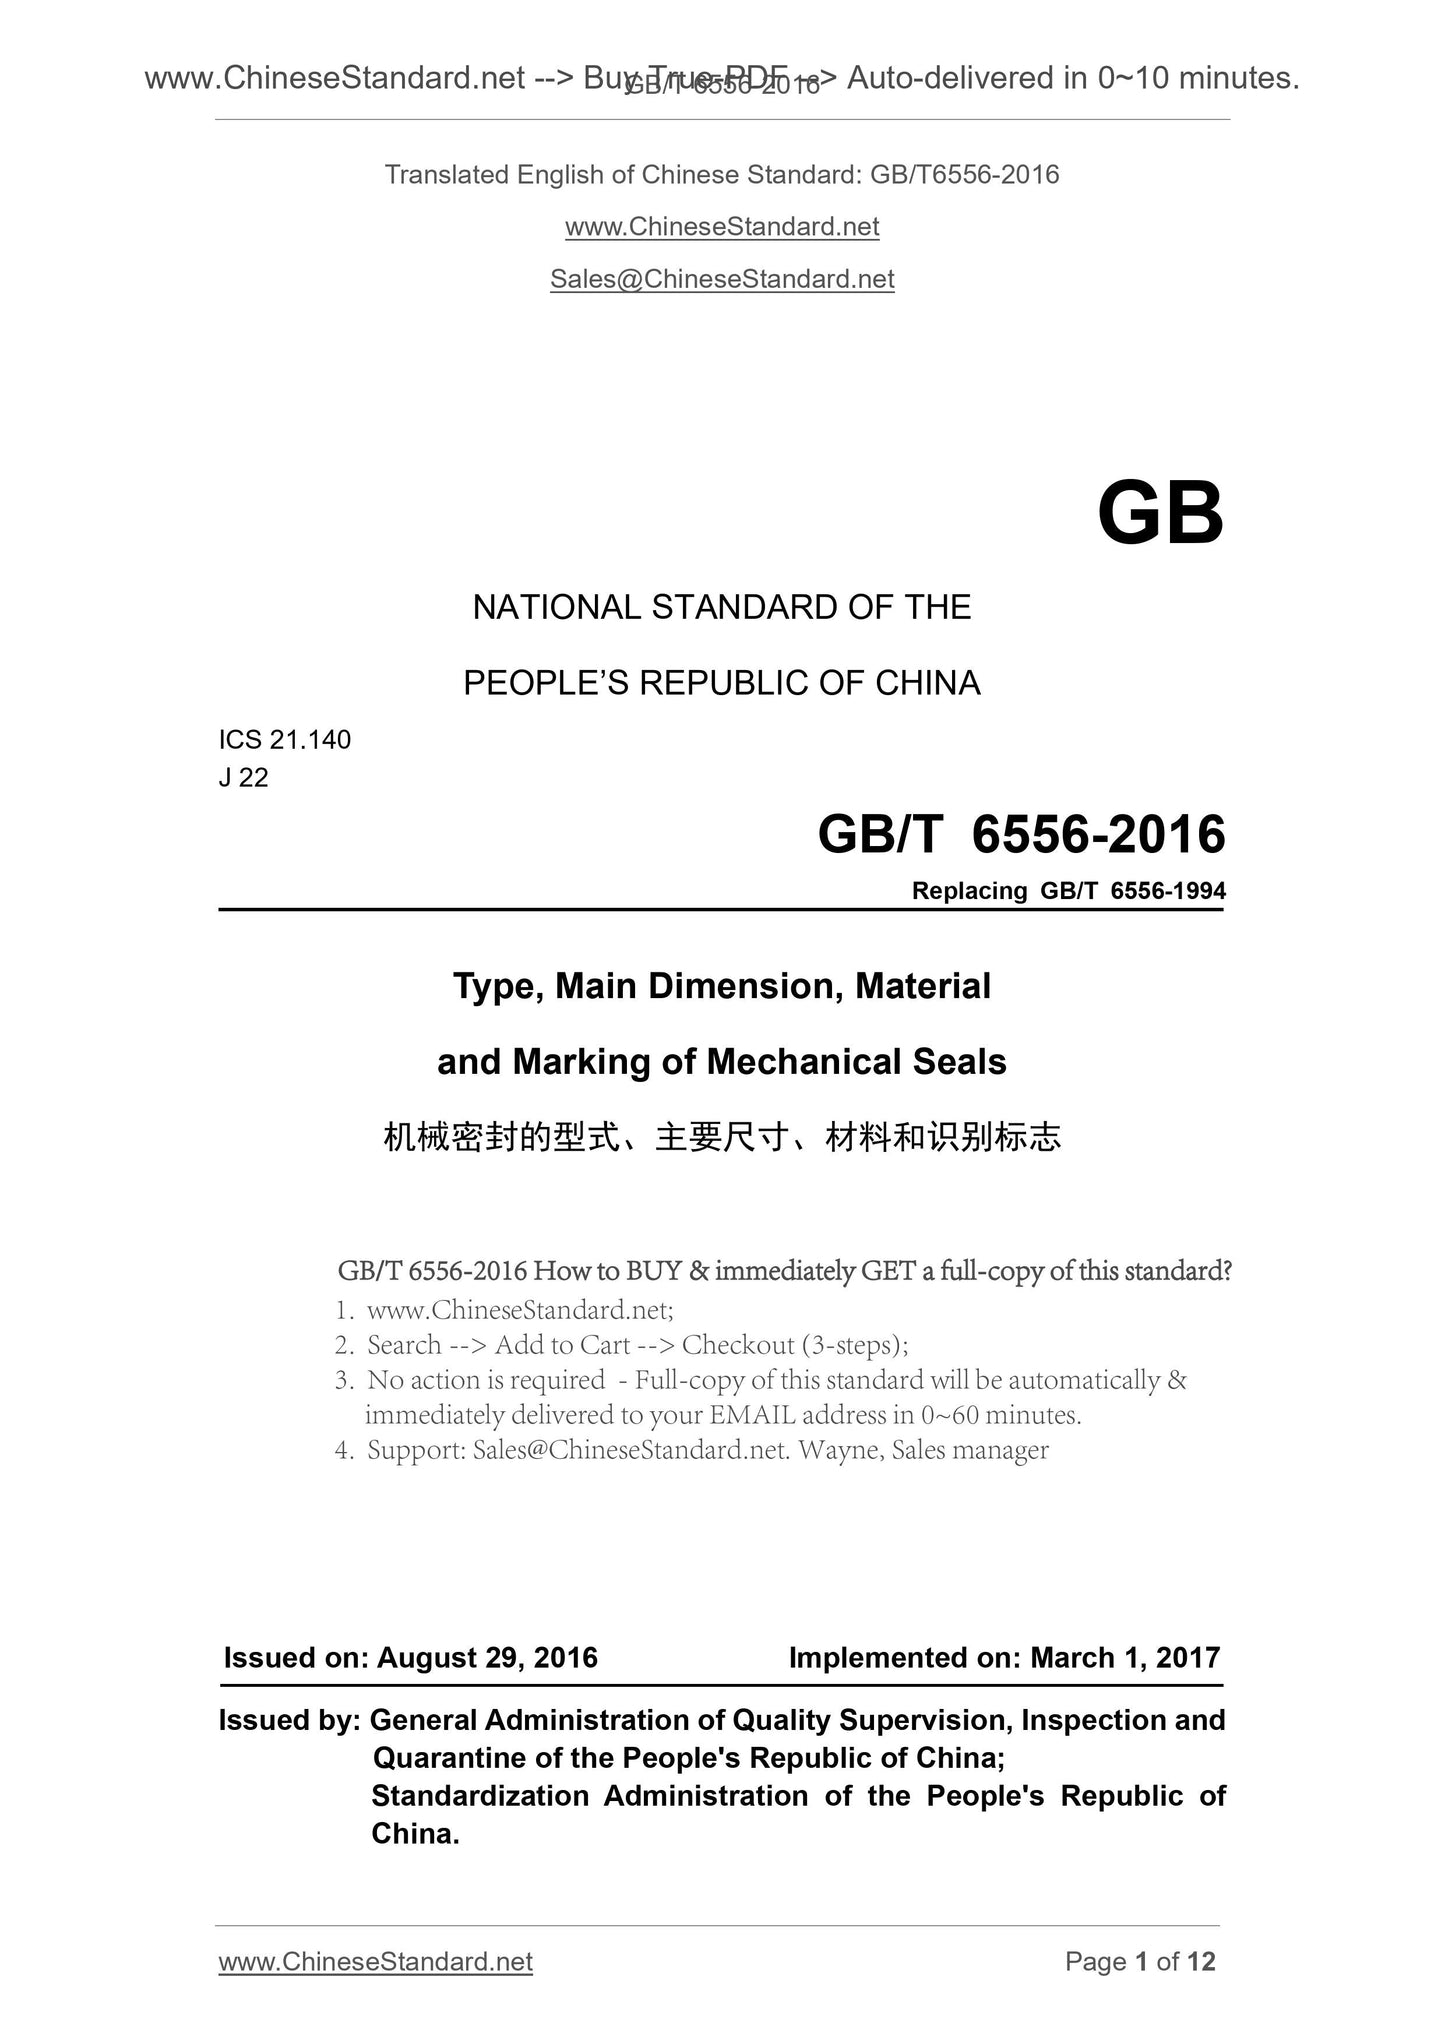 GB/T 6556-2016 Page 1